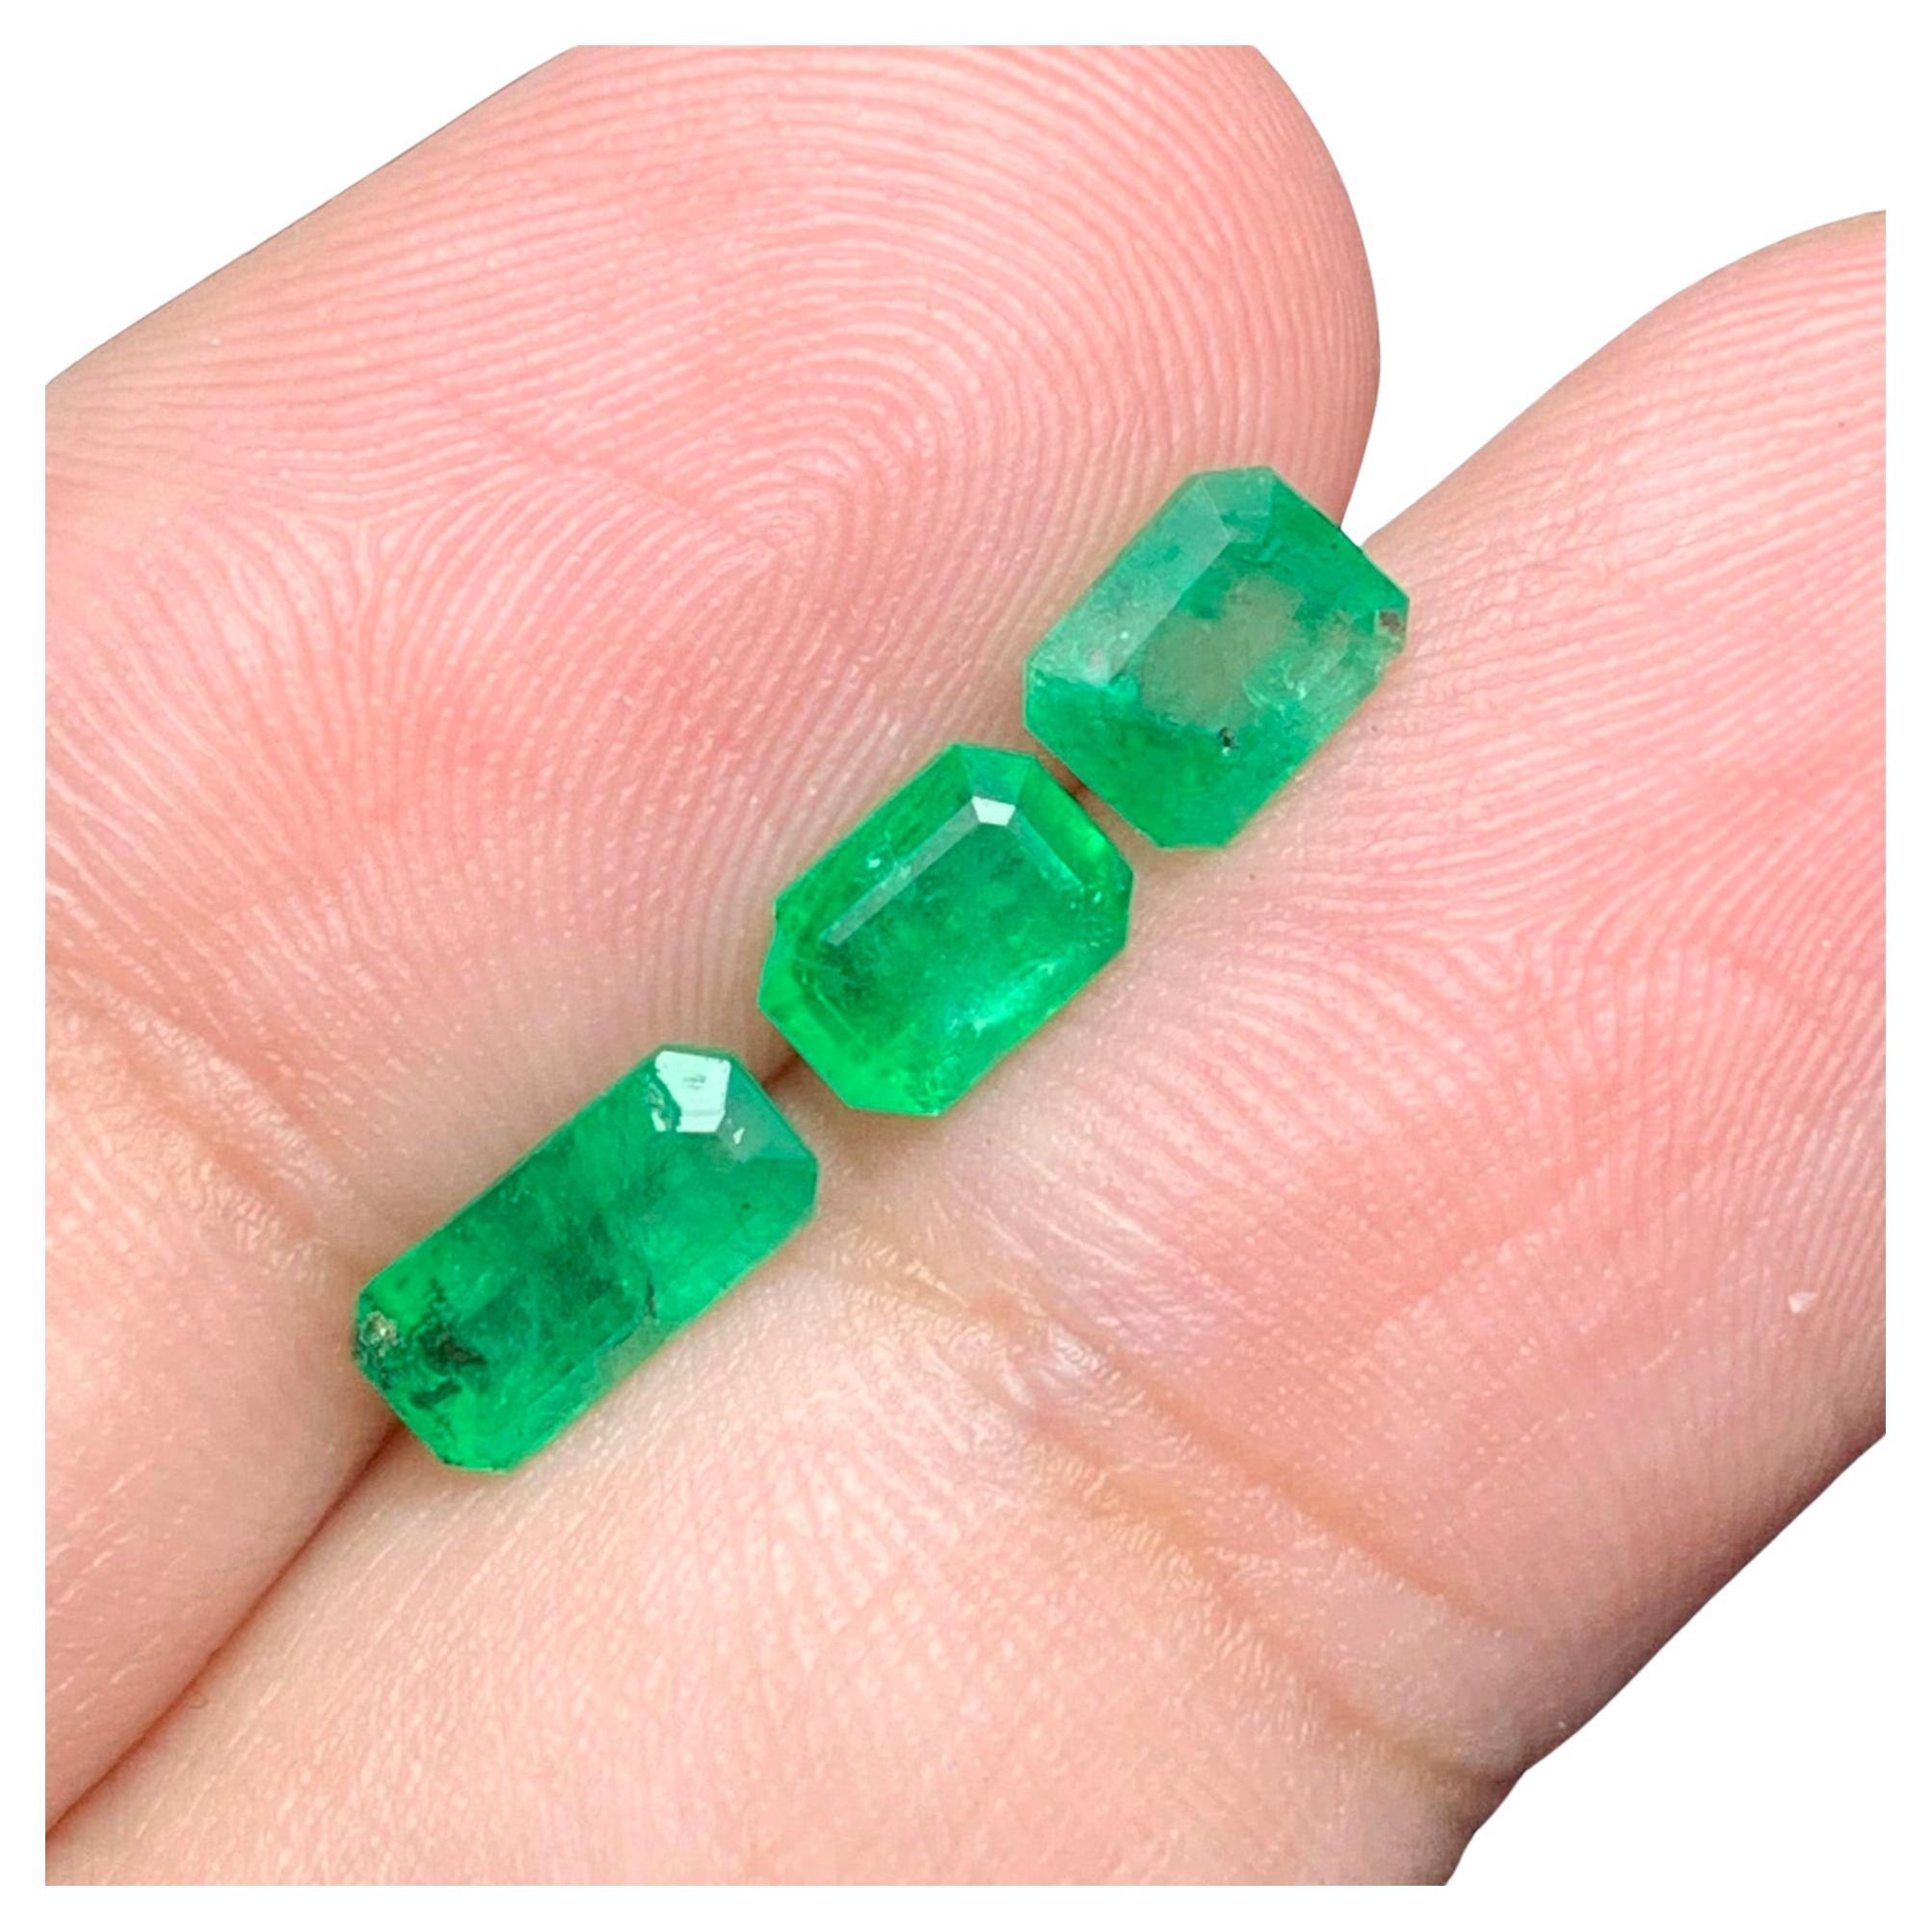 Pretty 2.05 Carat Natural Loose Emerald Set For Jewellery Making 